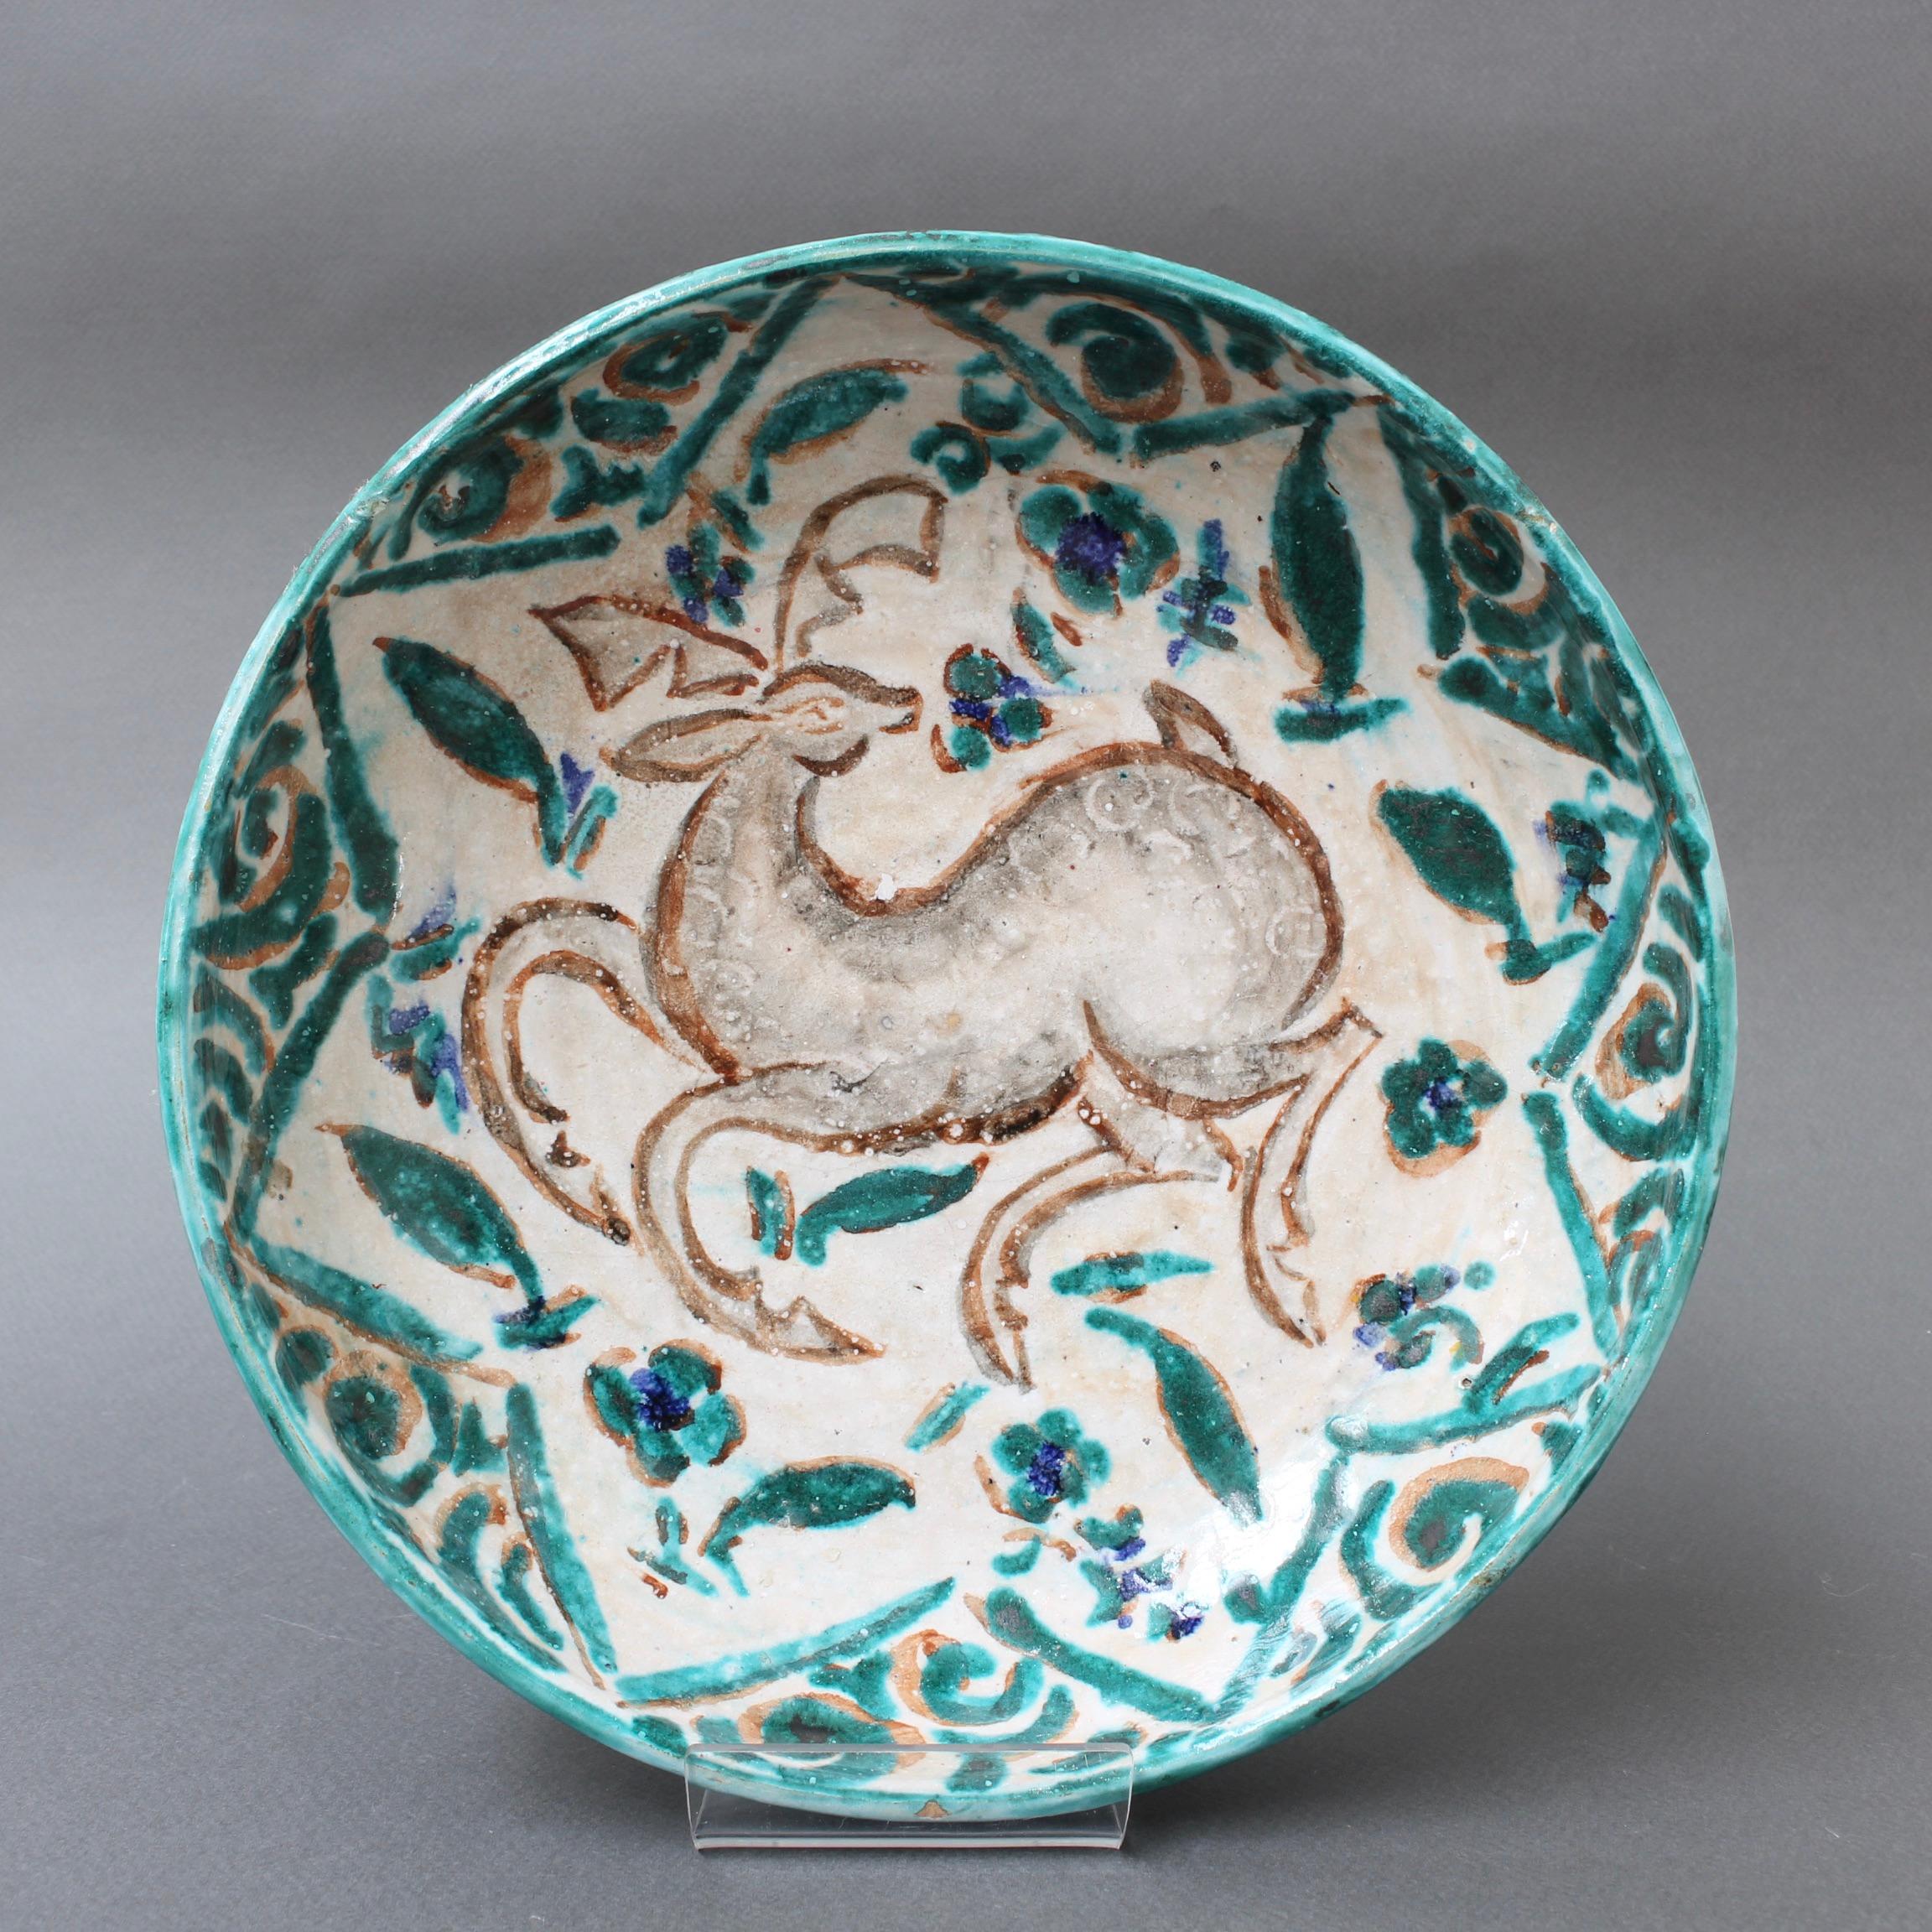 French Persian-inspired ceramic bowl by Édouard Cazaux (circa 1930s). Master ceramicist, Édouard Cazaux was inspired by antiquities, religion and animal life in his creations. This magnificently decorated ceramic bowl displays a stylised prancing